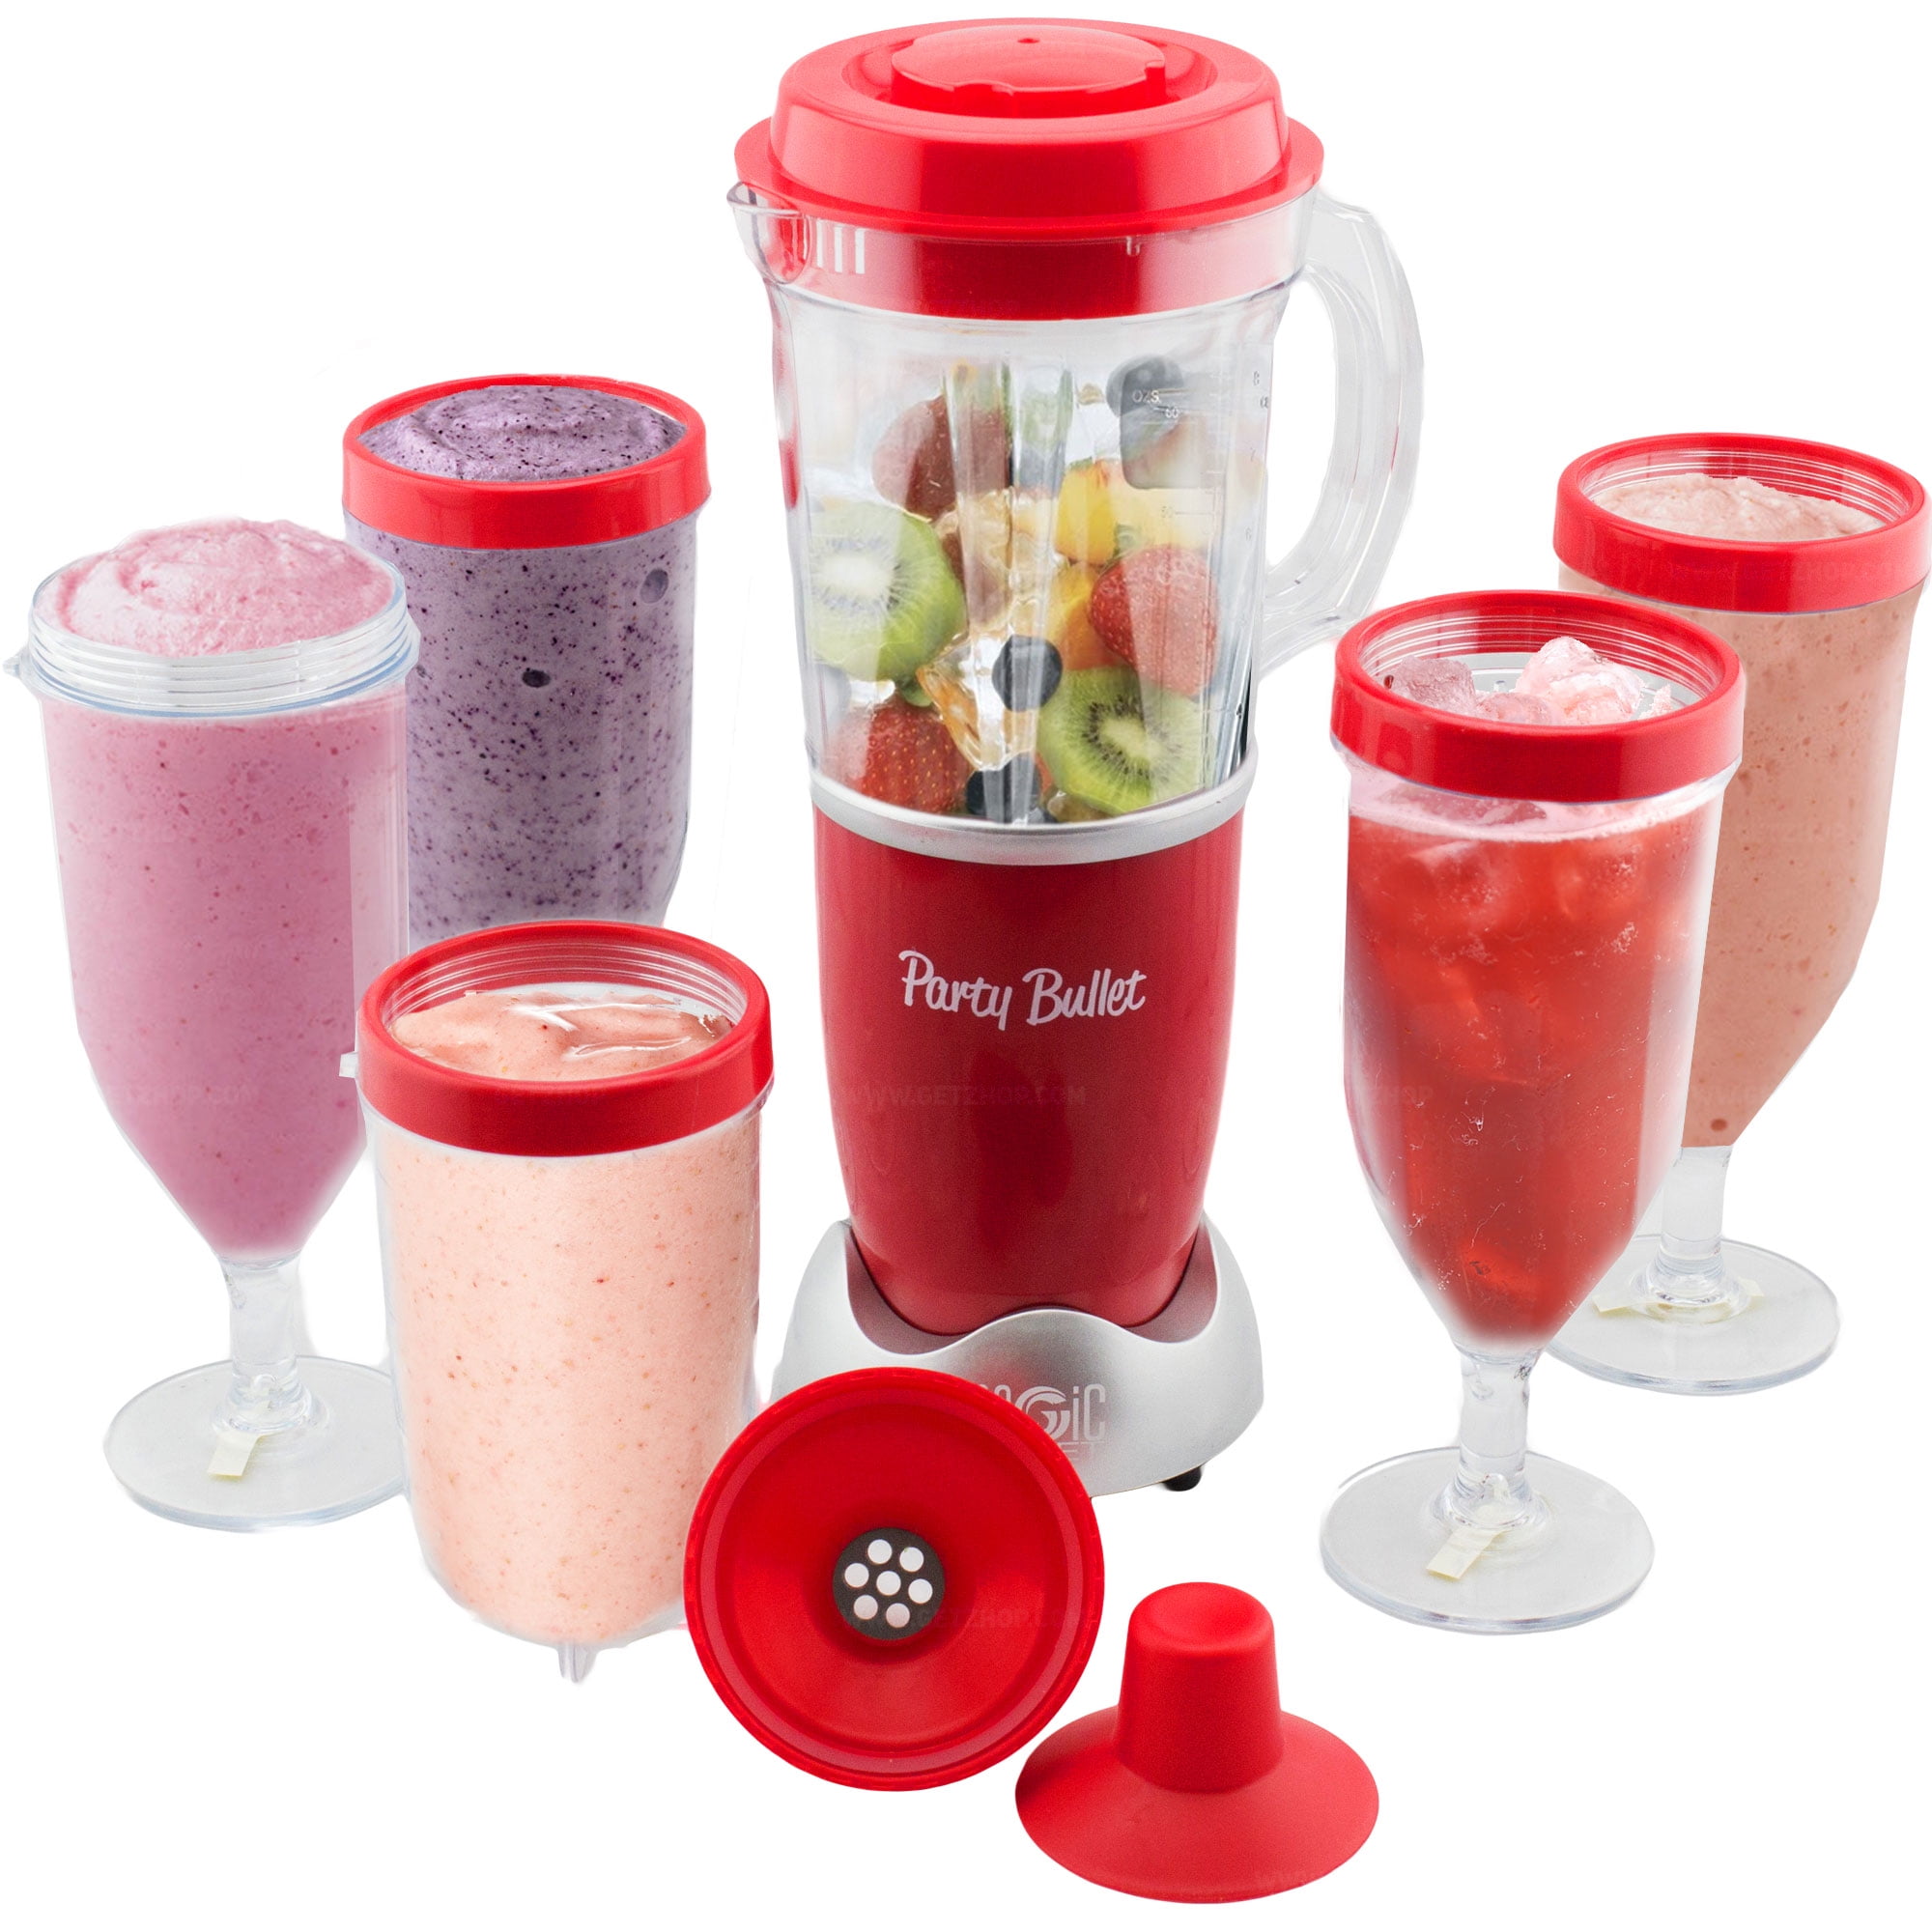 Recipe Book NIB Party Bullet by Magic Bullet  18pc Drink Making System